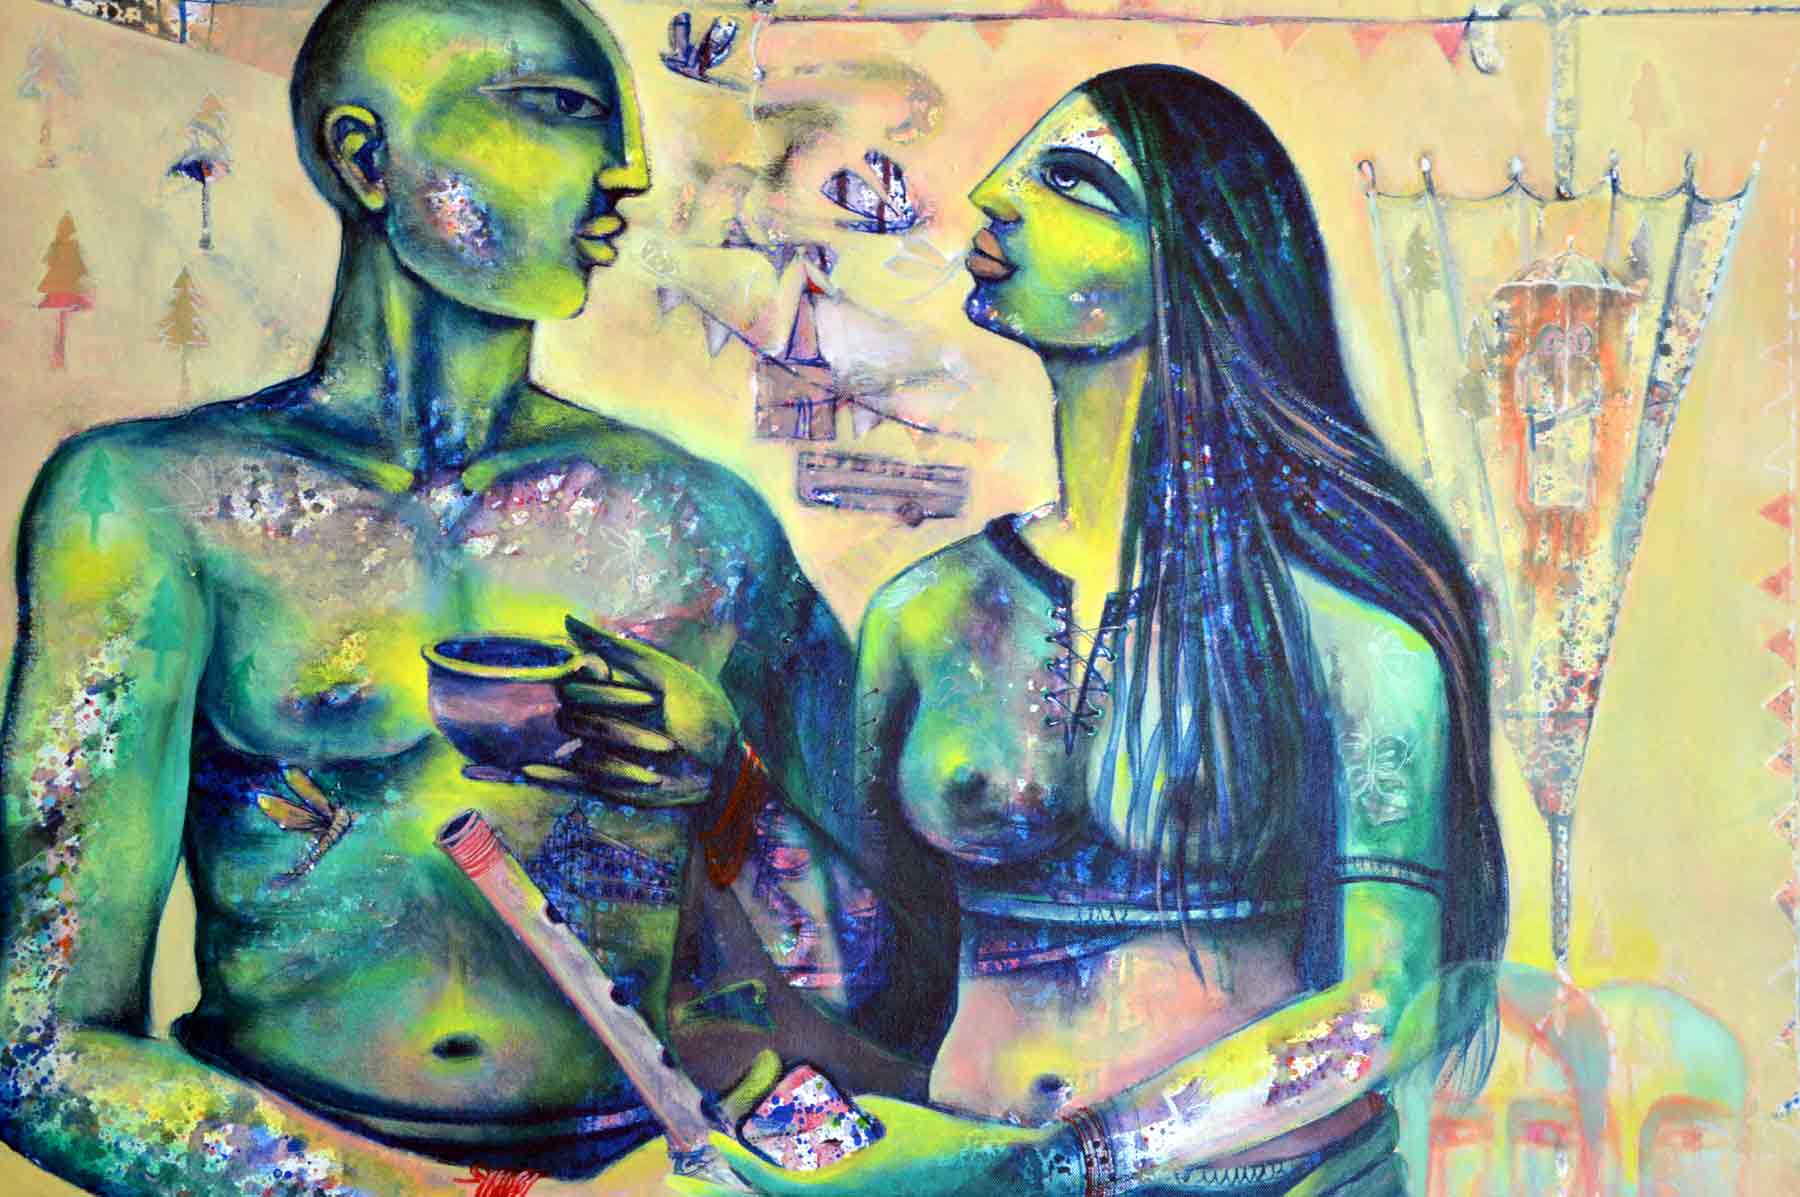 Conceptual Painting with Acrylic on Canvas "Tea of Love" art by Chaman Sharma